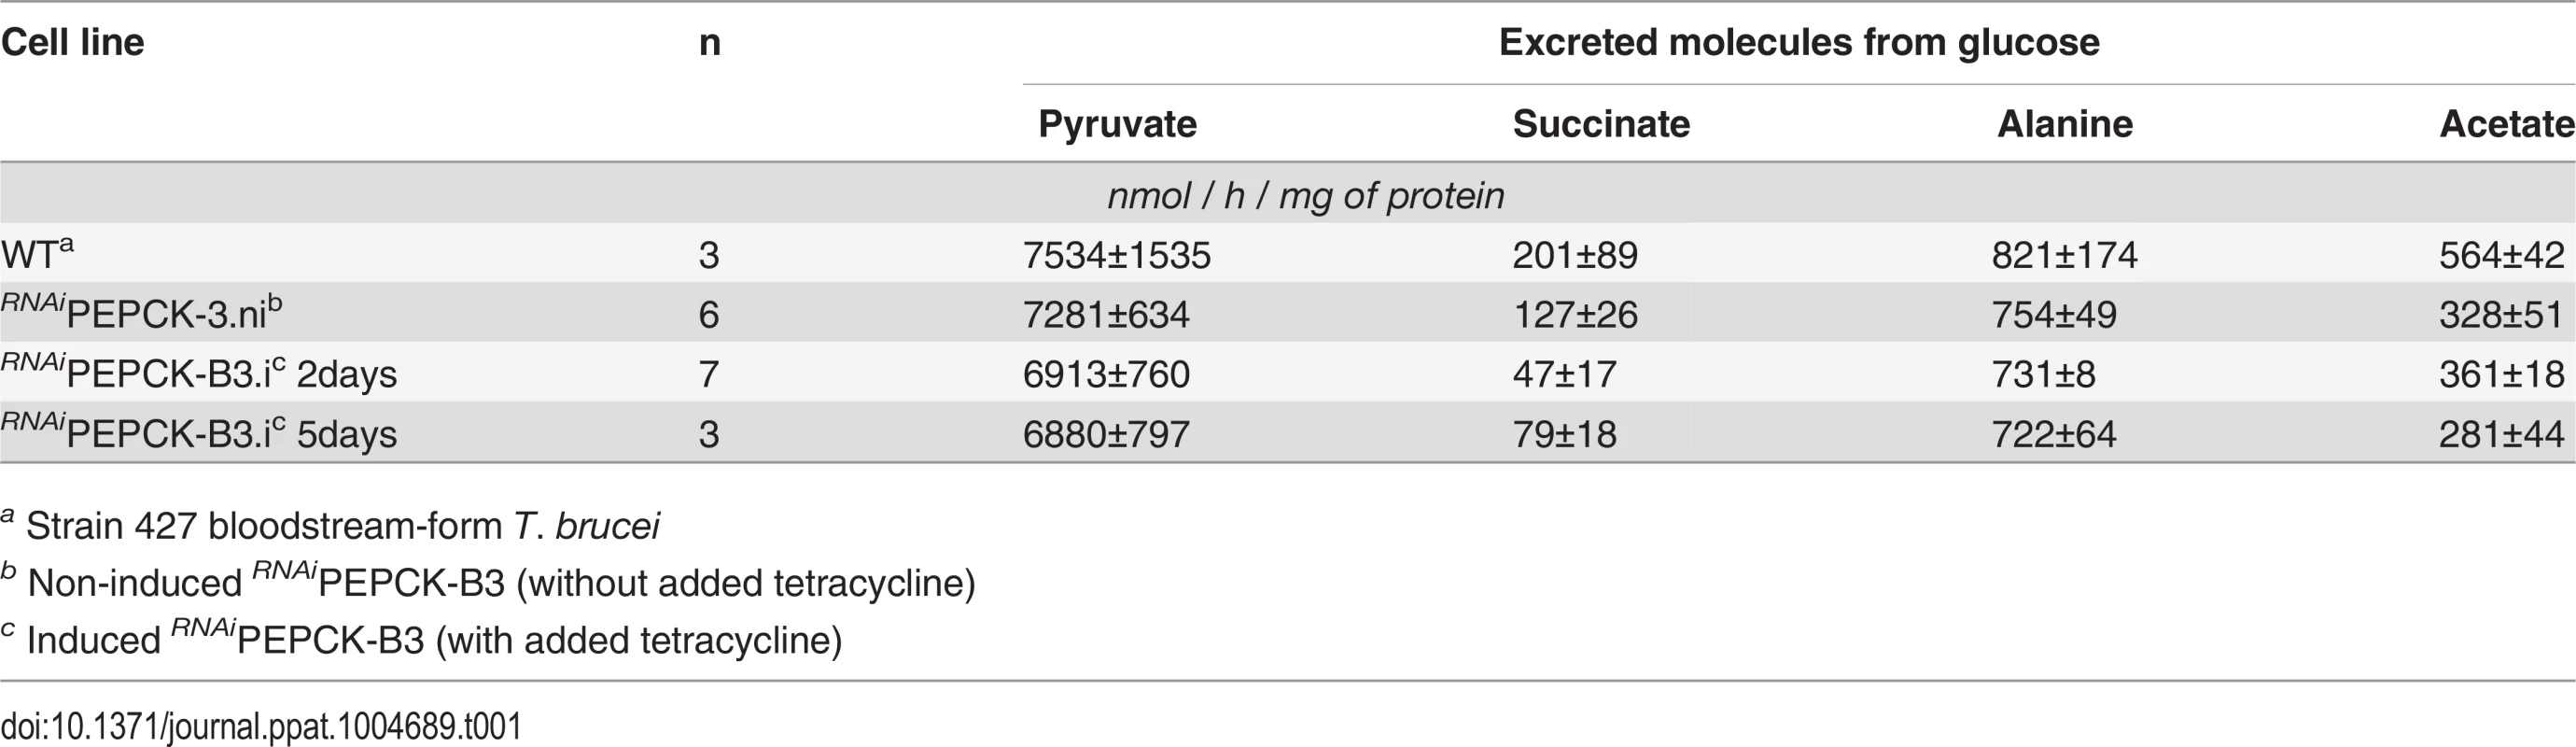 Production of succinate, pyruvate, alanine and acetate from glucose in PEPCK RNAi <i>T</i>. <i>brucei</i> measured by <sup>1</sup>H-NMR.